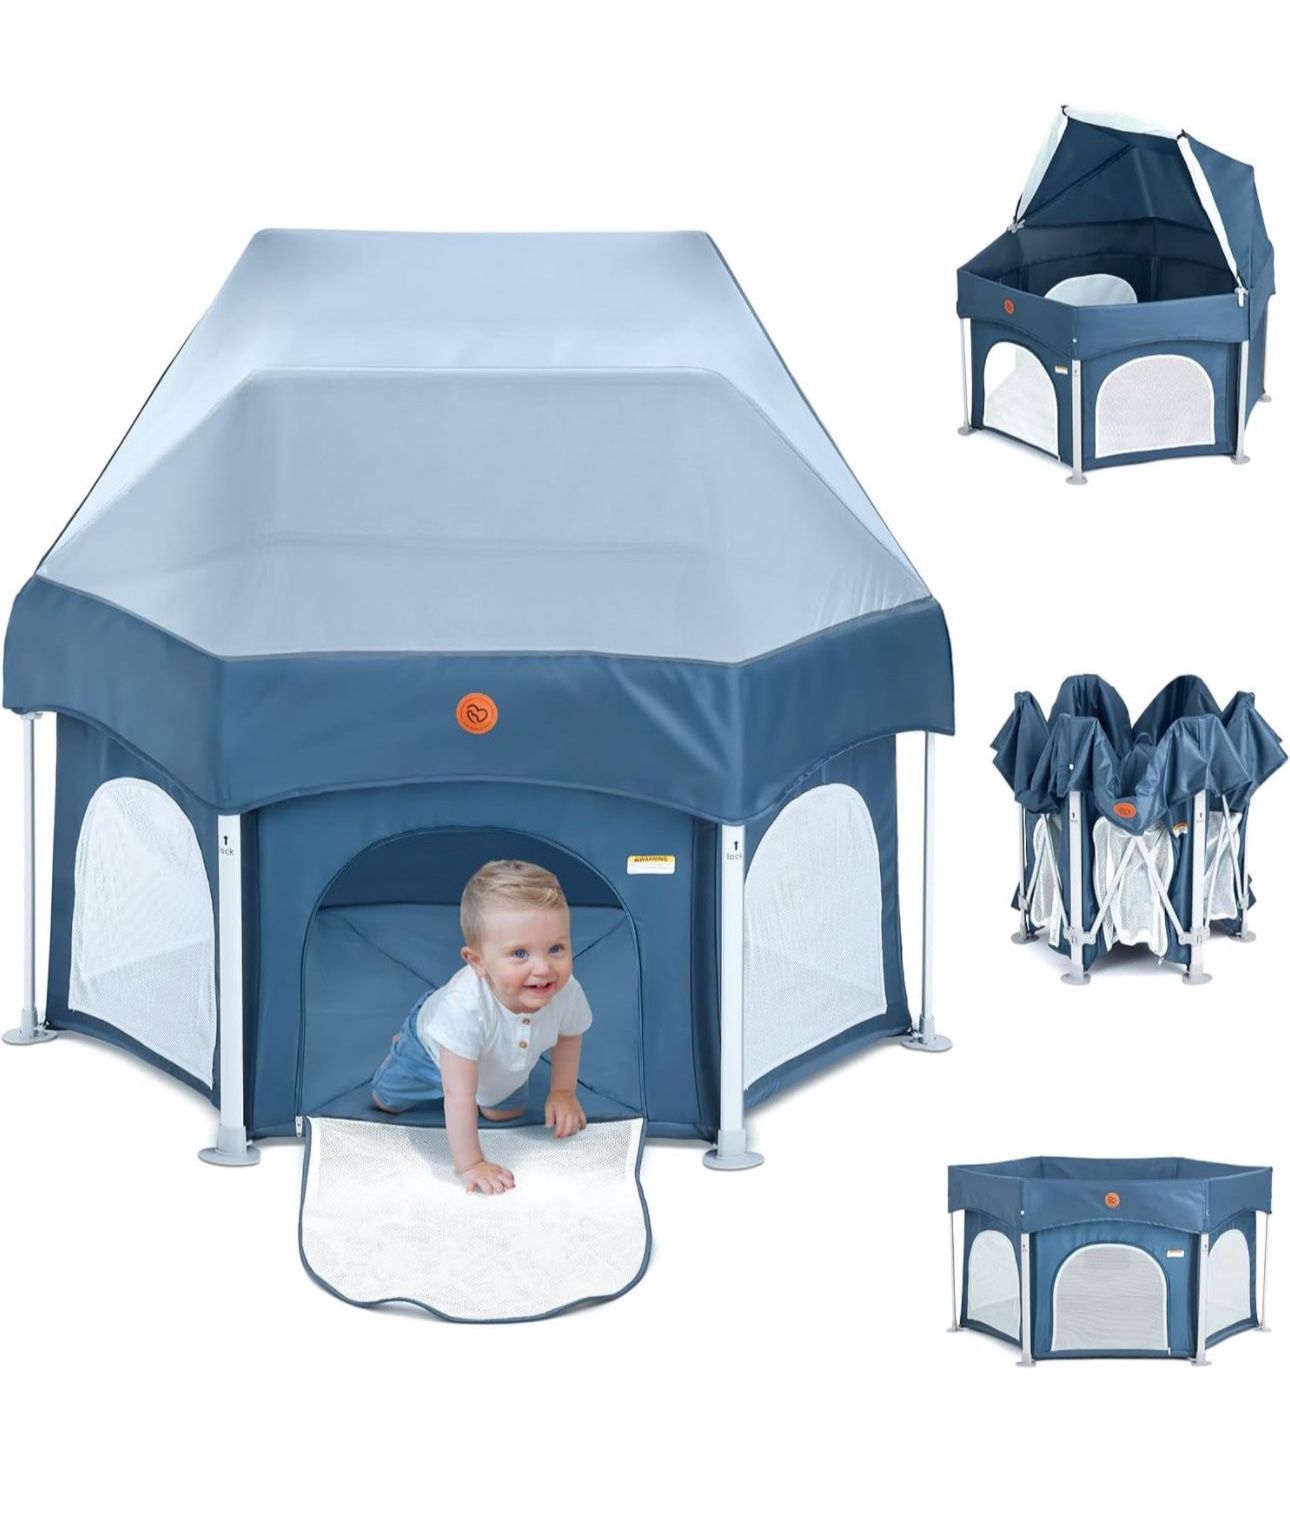 BabyBond 53" Portable Indoor and Outdoor Baby Playpen with Mat- Pop Up Tent Pack and Play Baby Playpen with Canopy for Babies and Toddlers Play Yards 